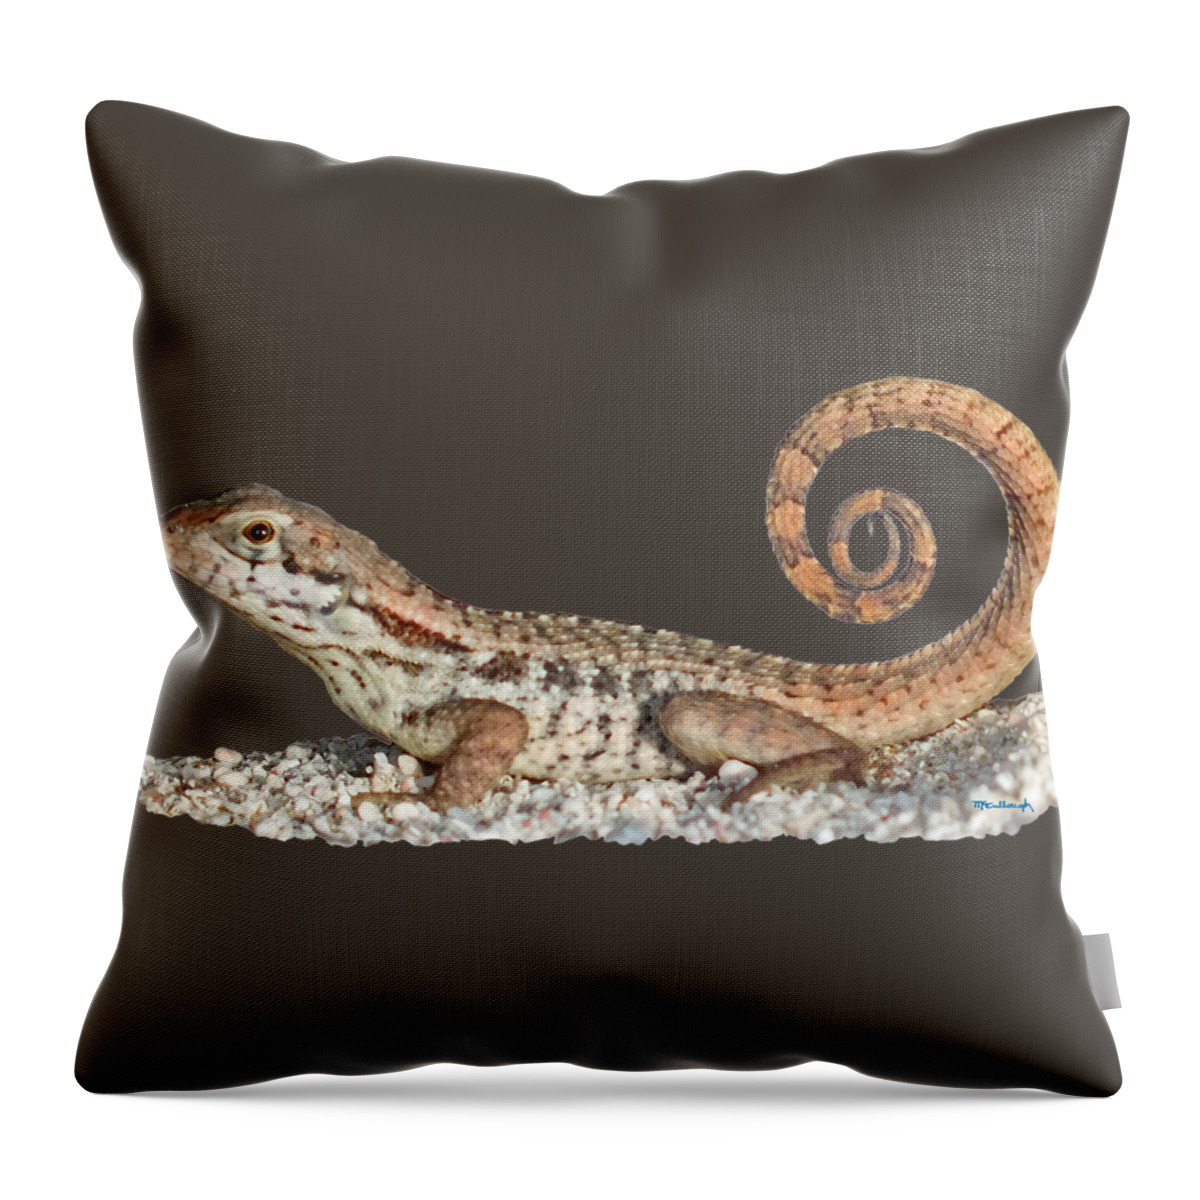 Duanekmccullough Throw Pillow featuring the photograph Curlytail Lizard Clear by Duane McCullough